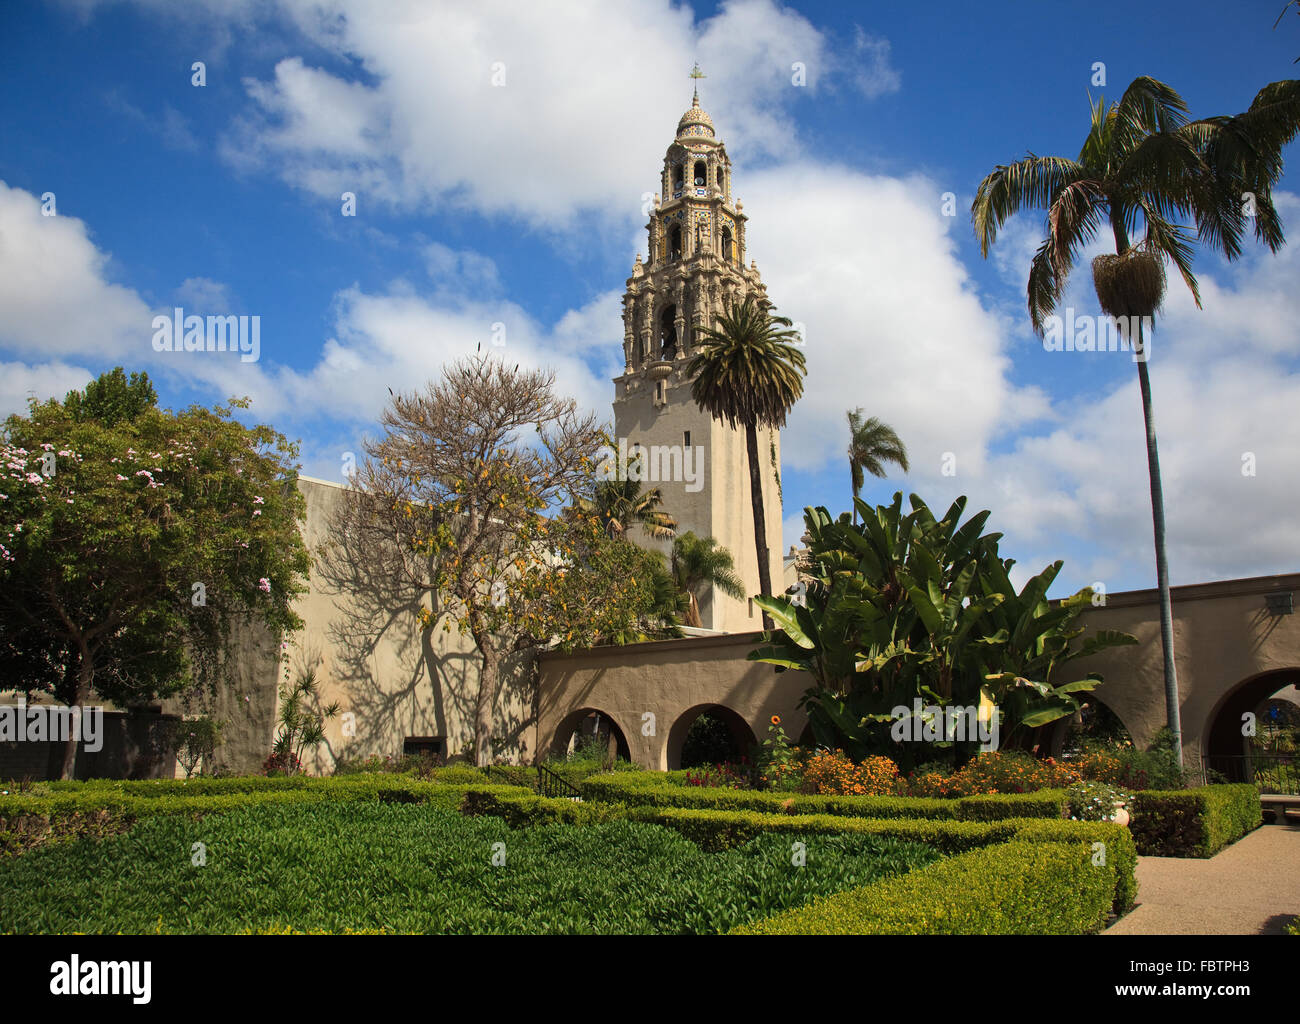 View of the ornate California Tower from the Alcazar Gardens in Balboa Park in San Diego Stock Photo